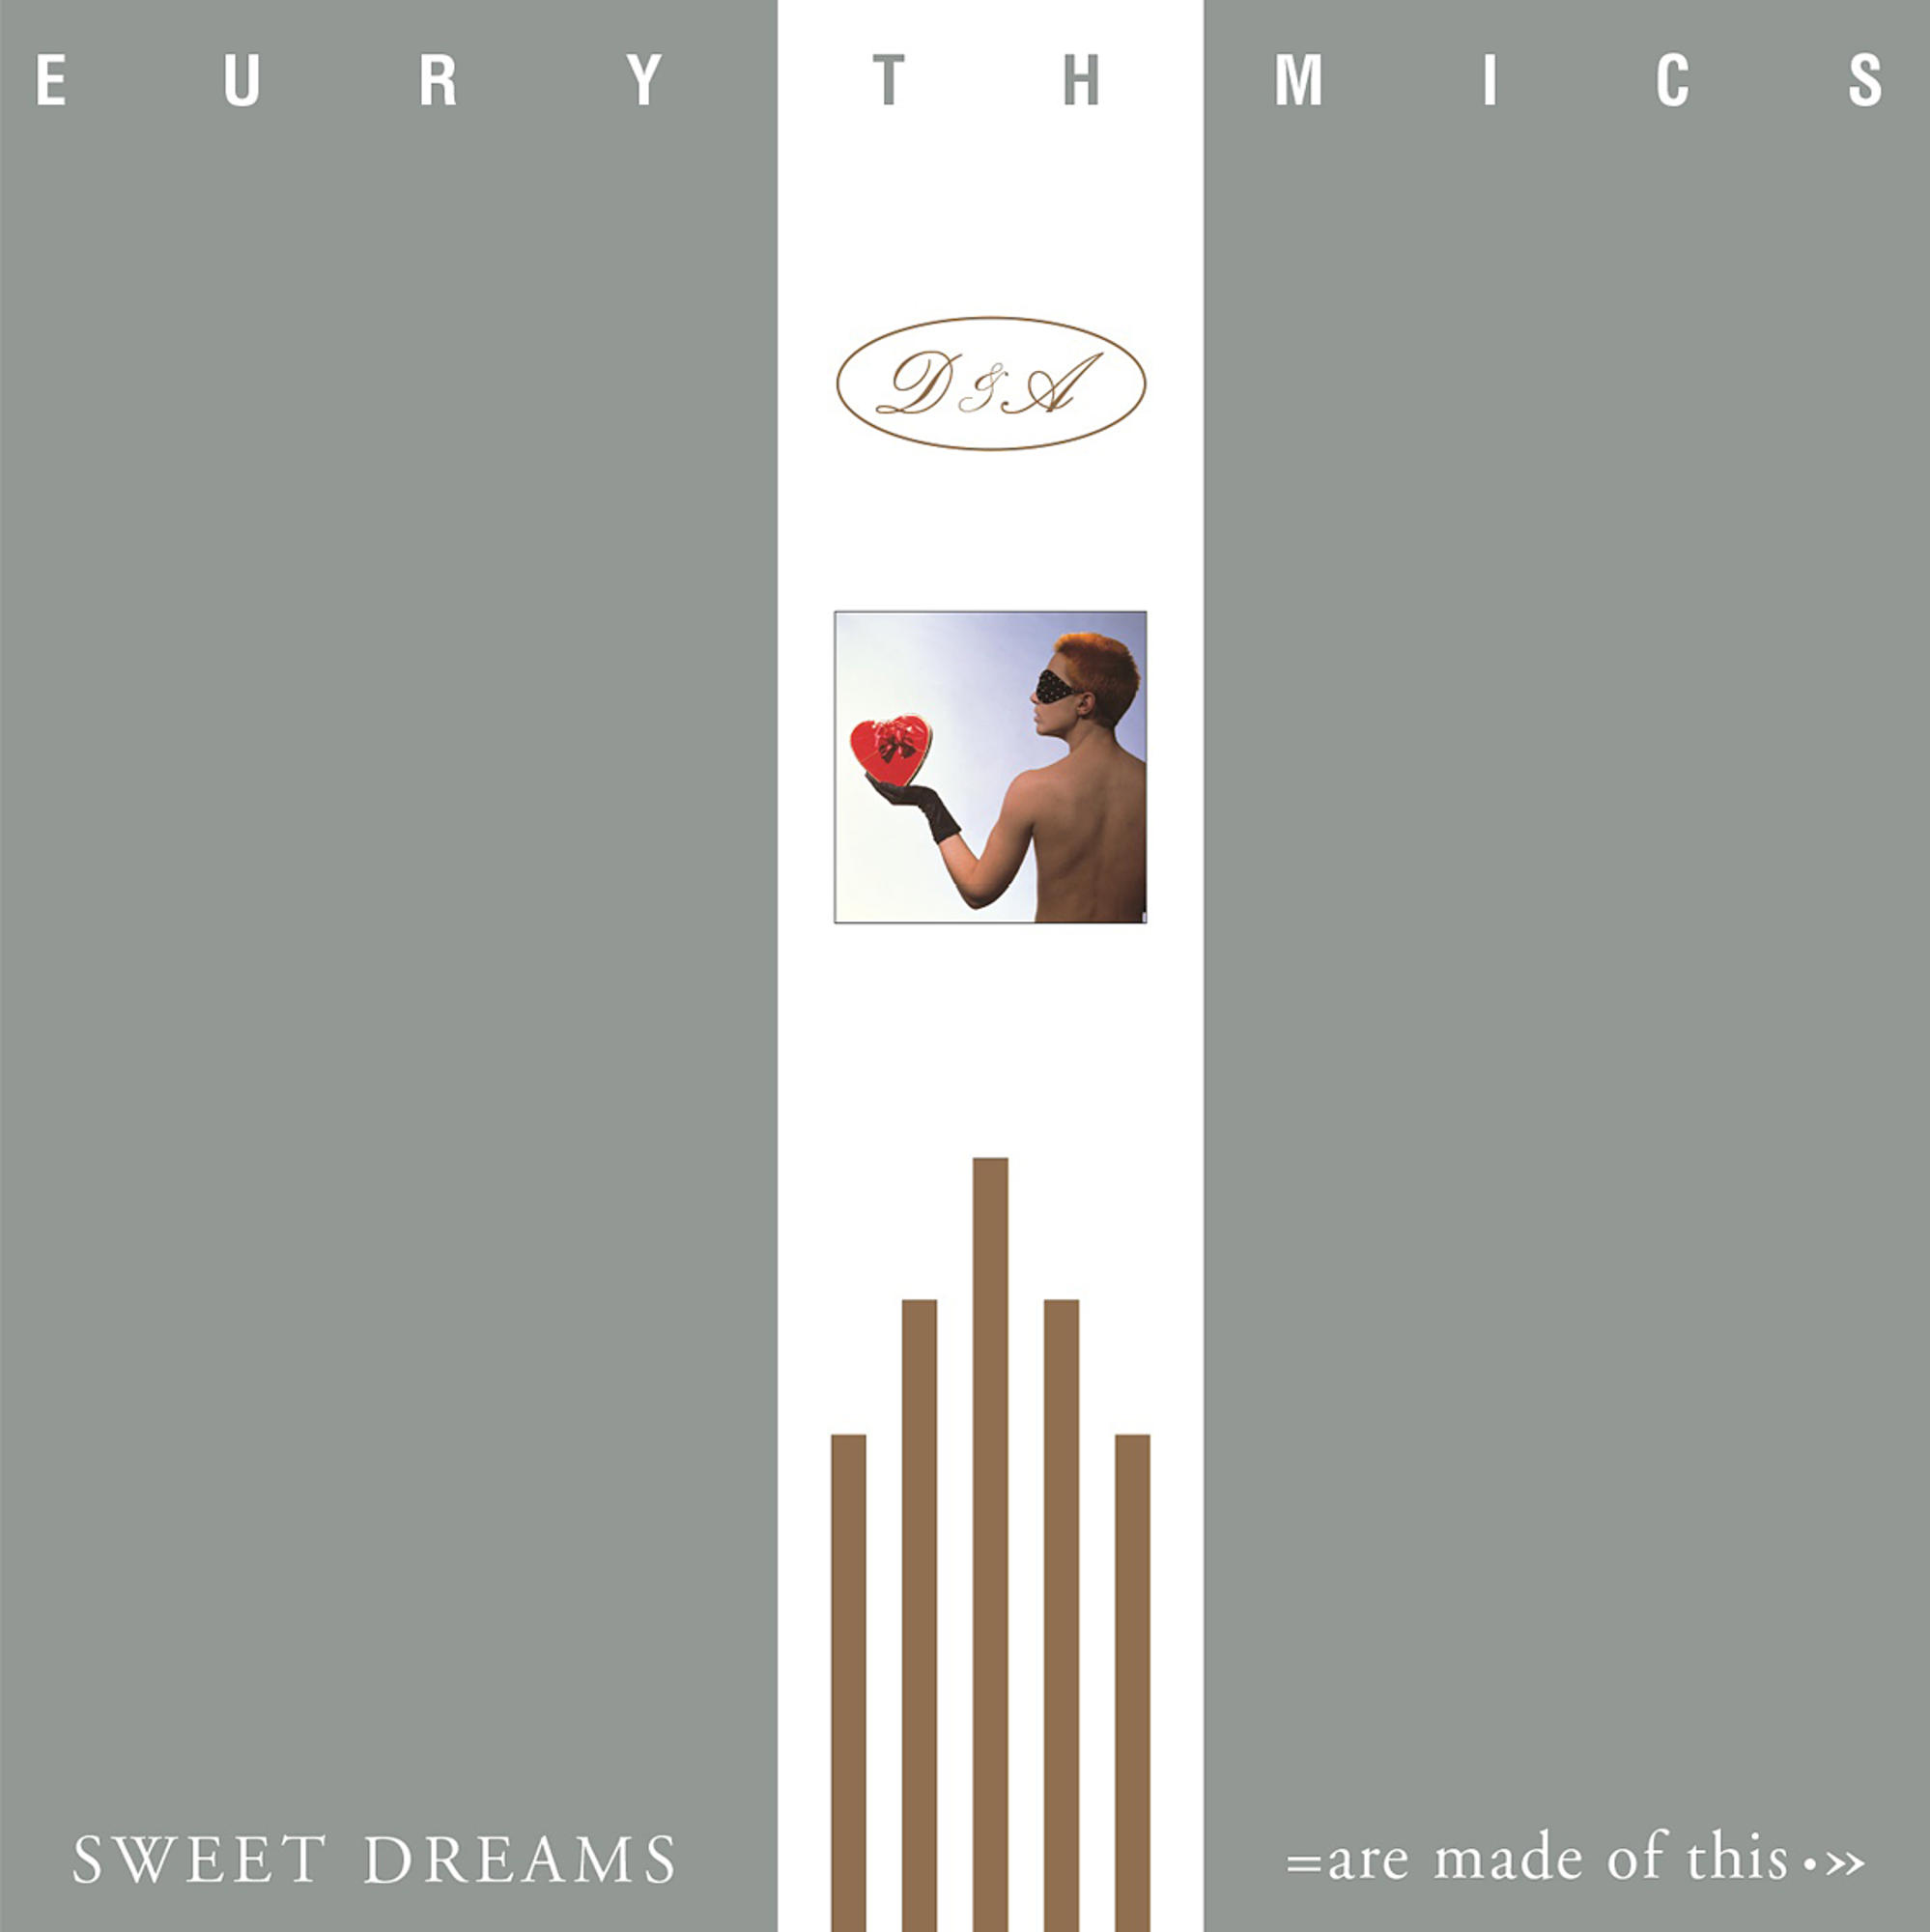 Eurythmics - Sweet Dreams of (Are (Vinyl) This) - Made